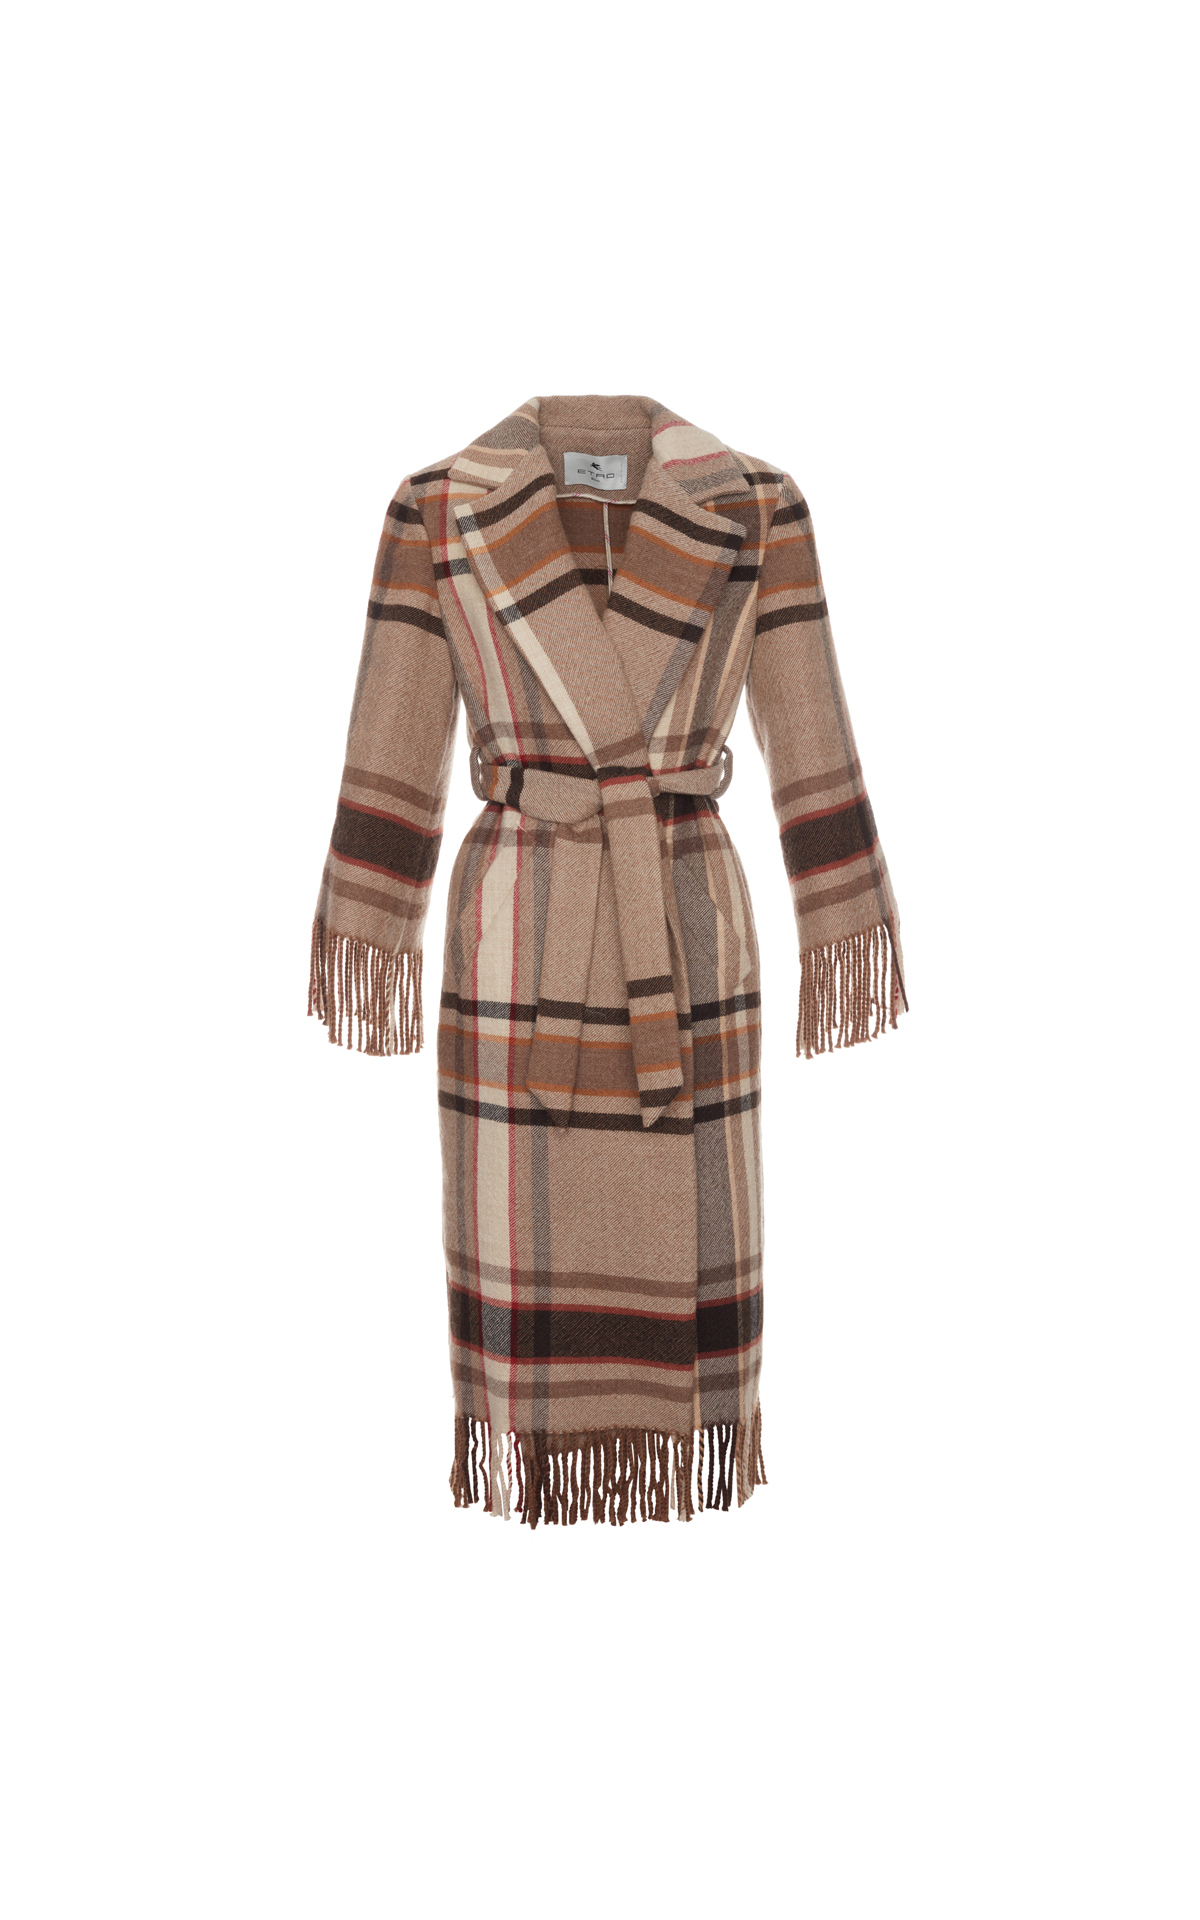 Etro Check coat from Bicester Village